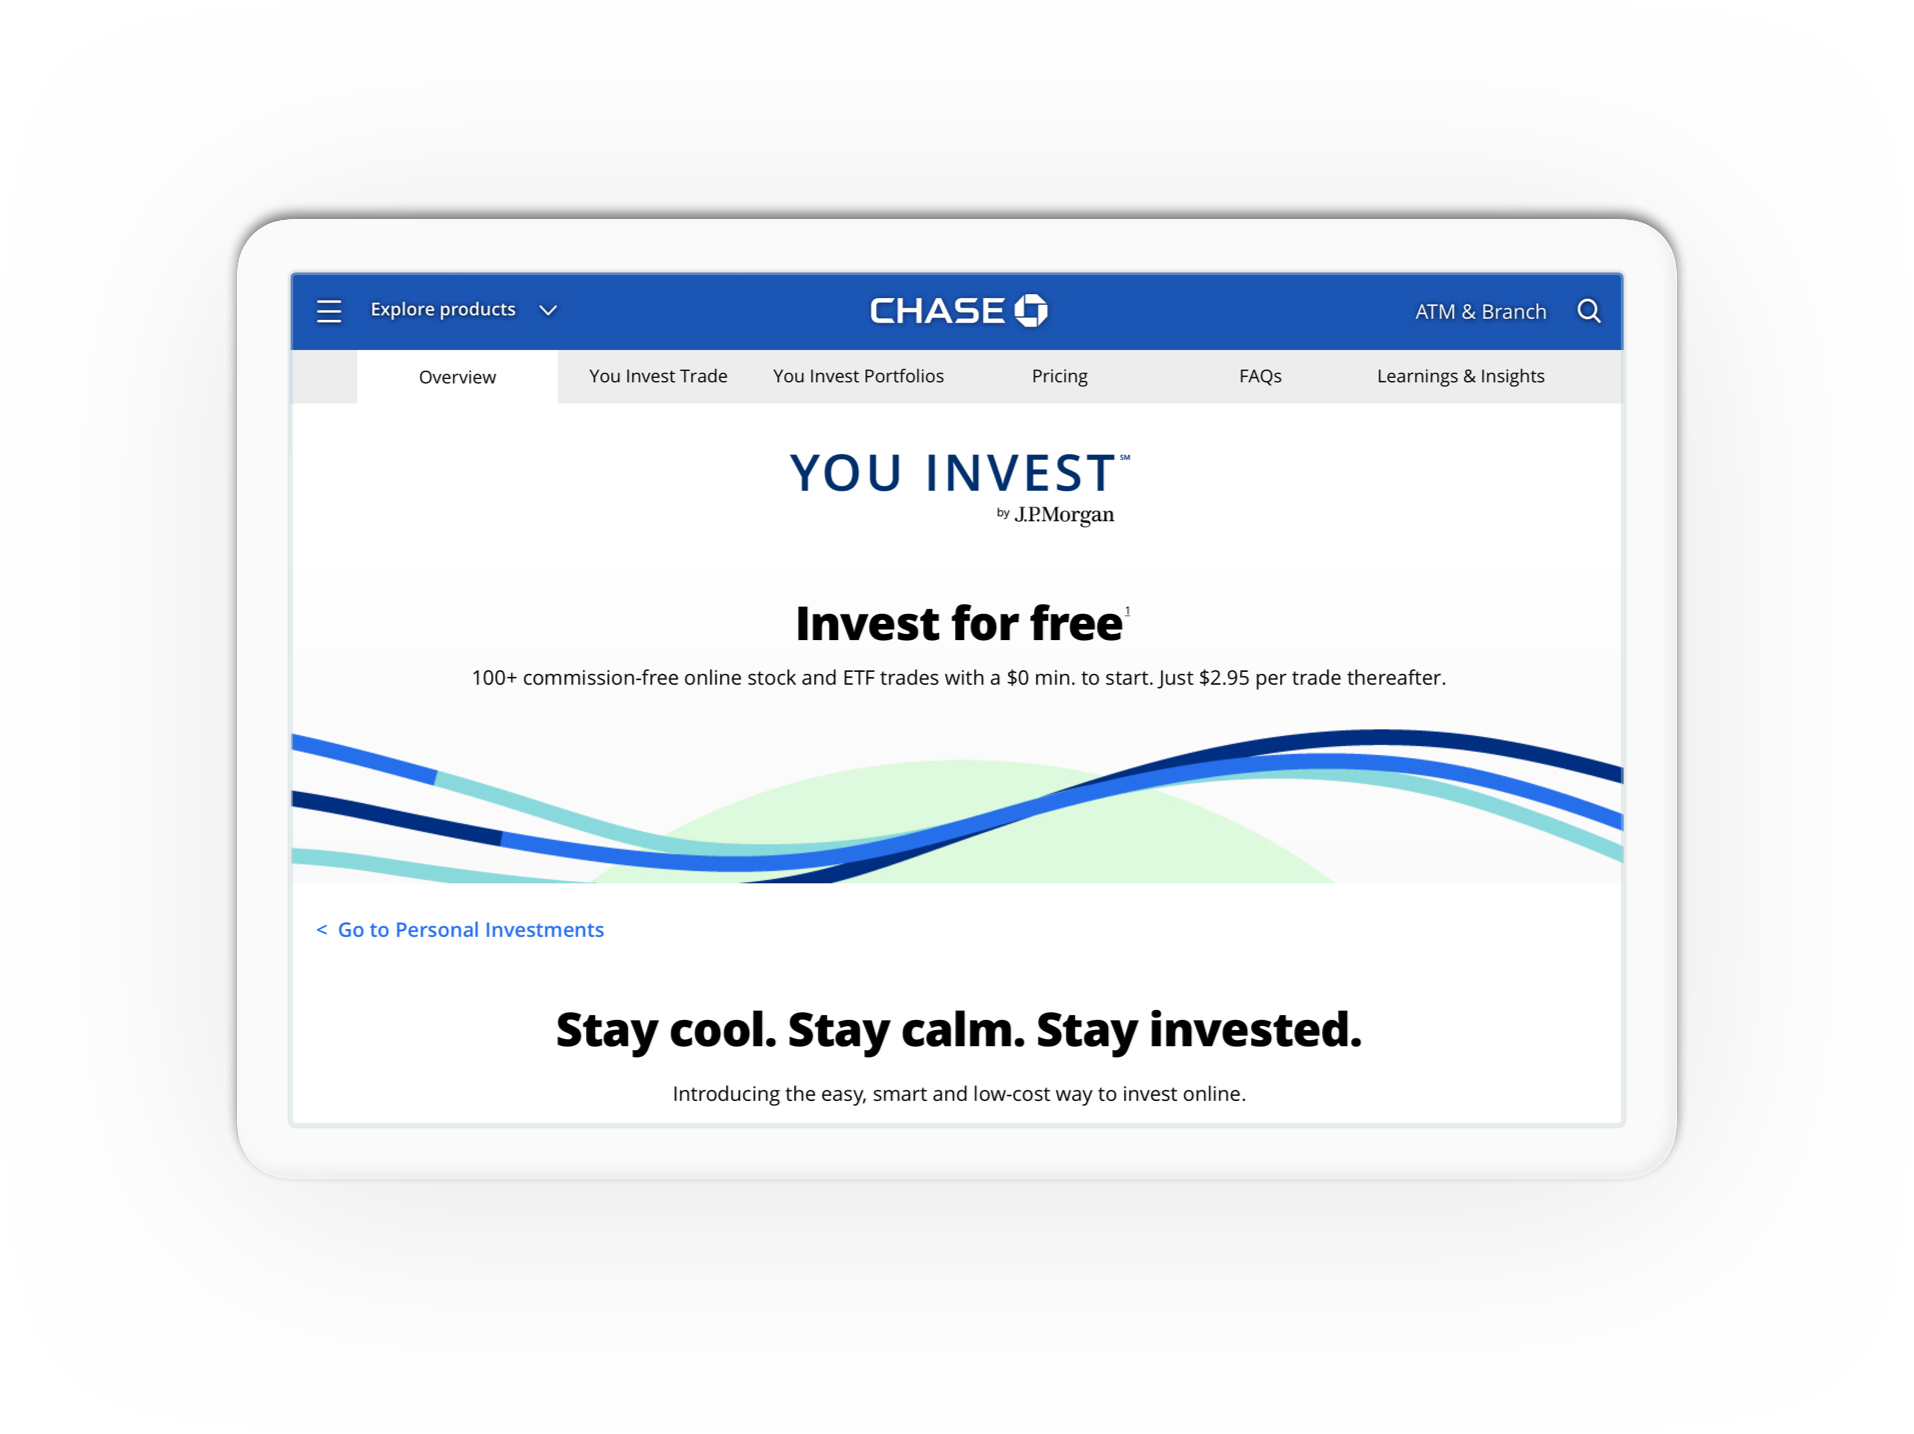 Meet You Invest: A New Way to Trade Online Commission-Free